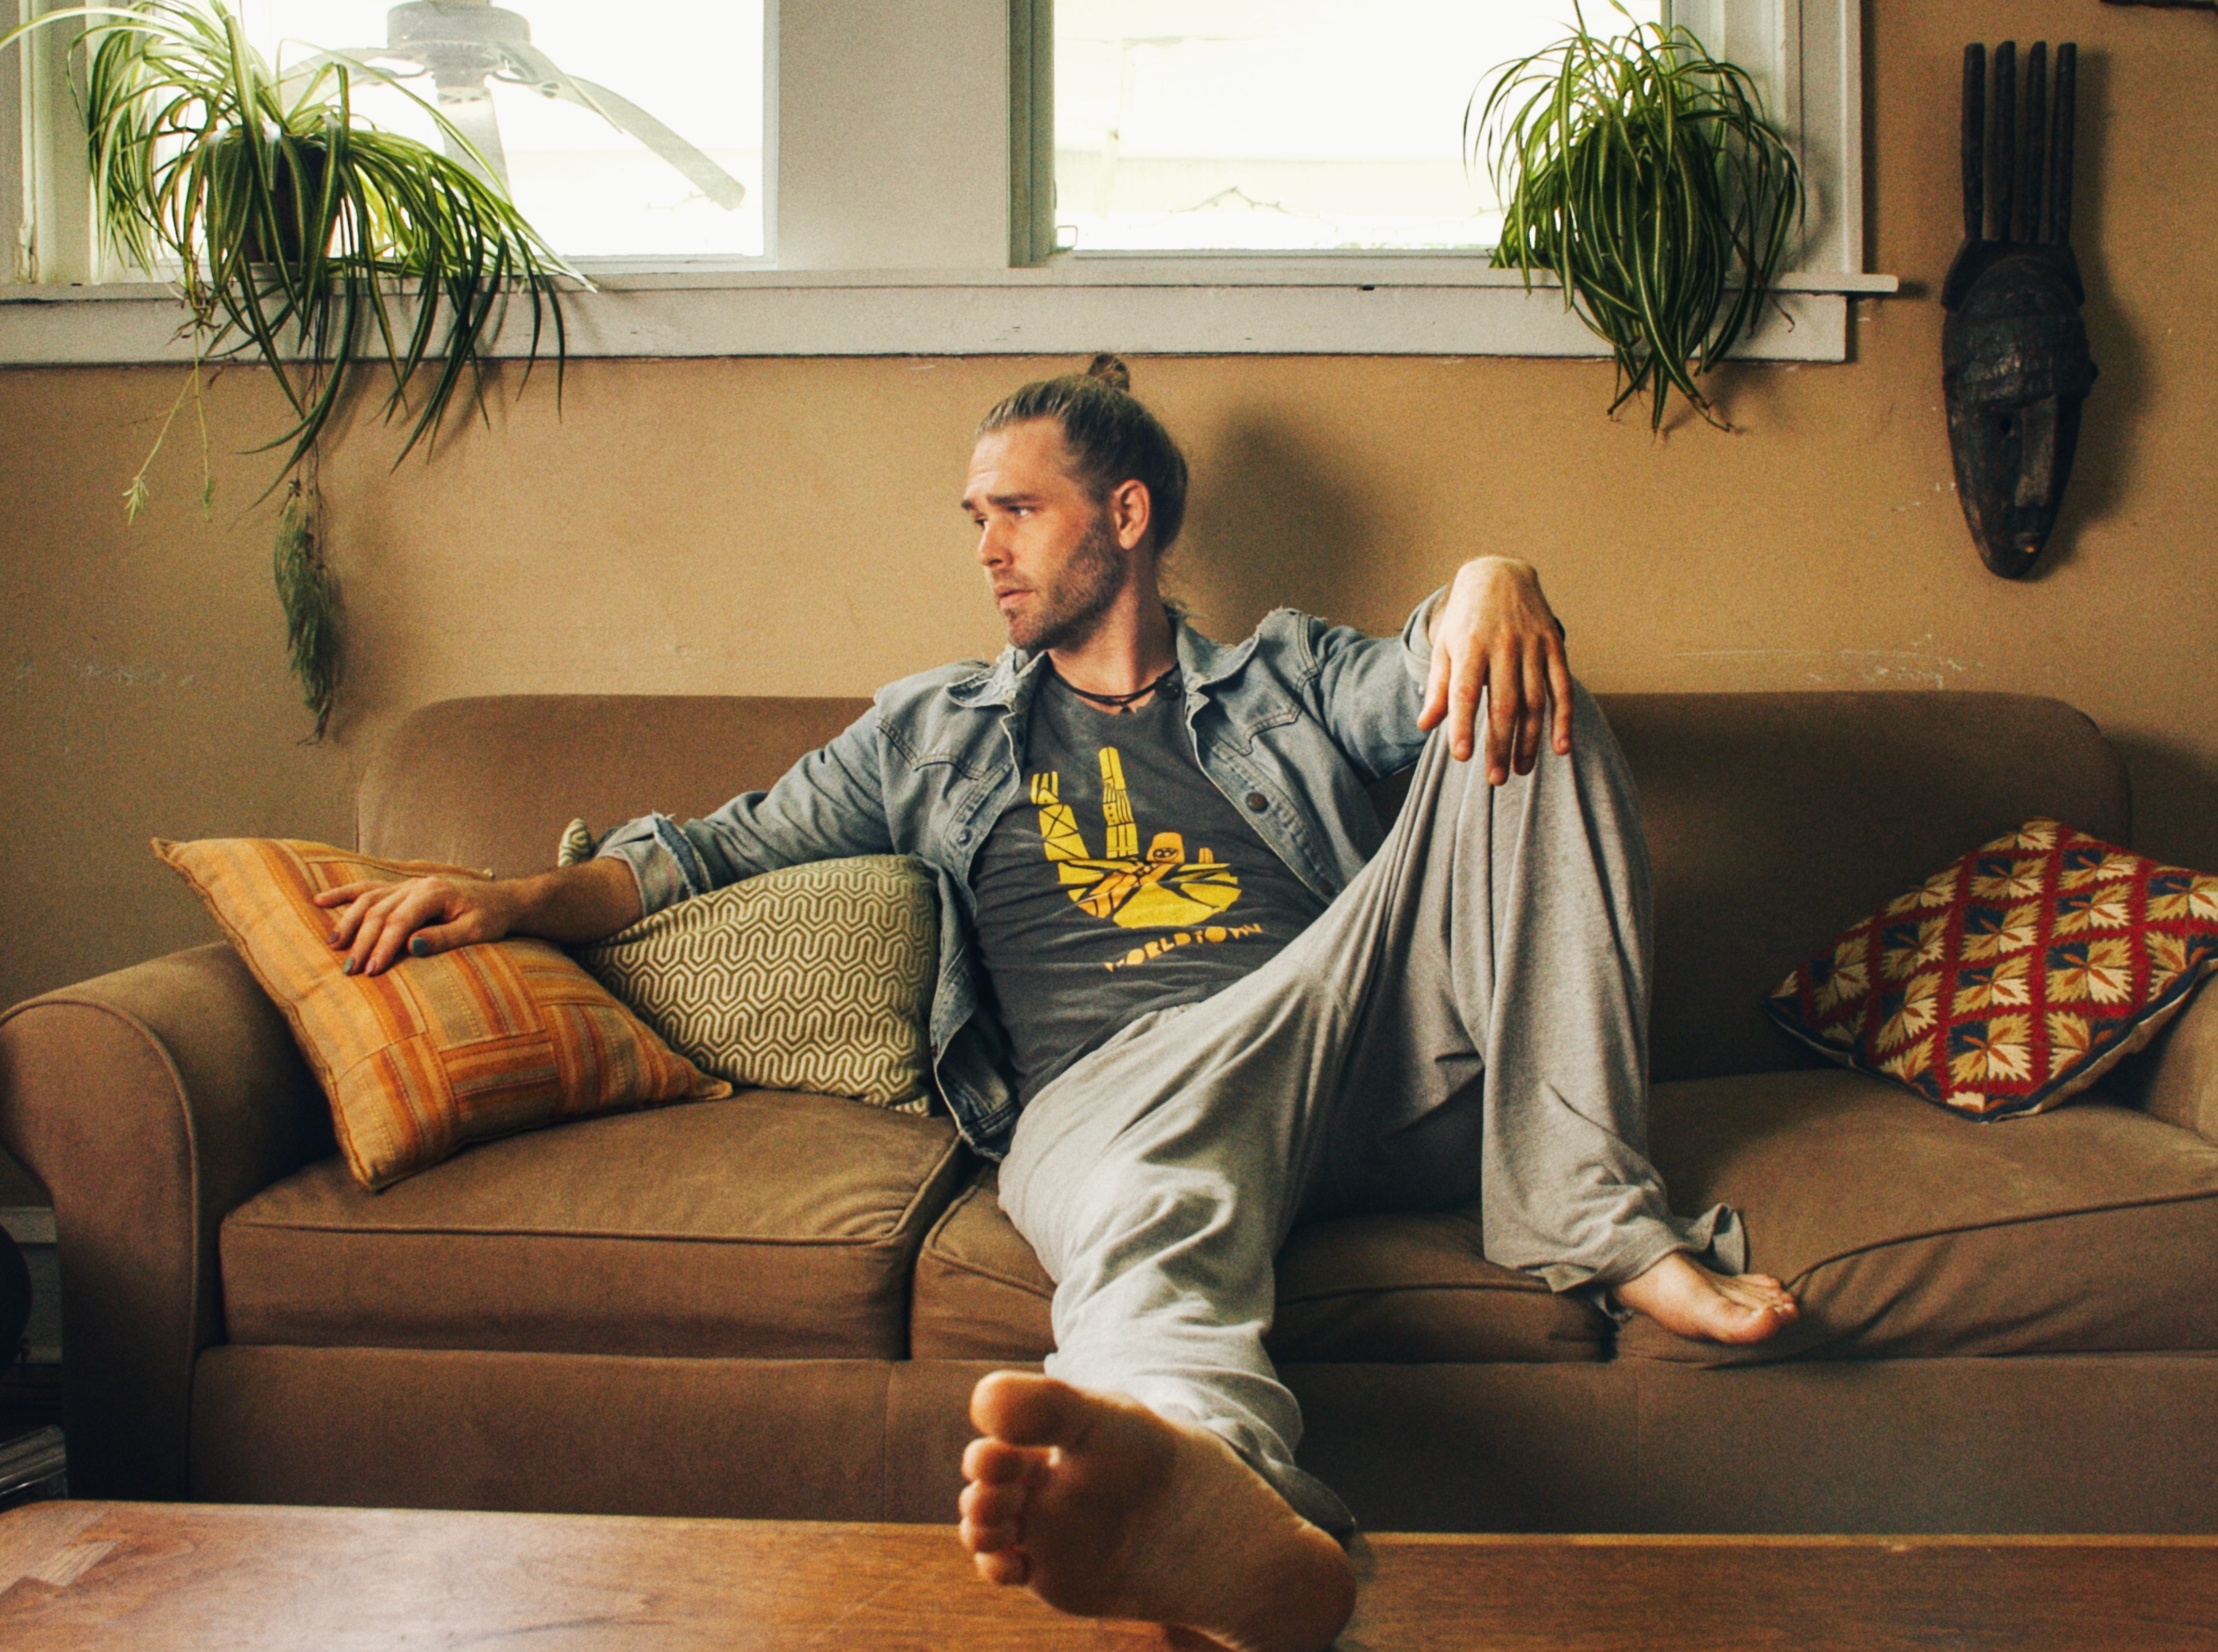 Ryan-Tennis-Couch-hi-res.png